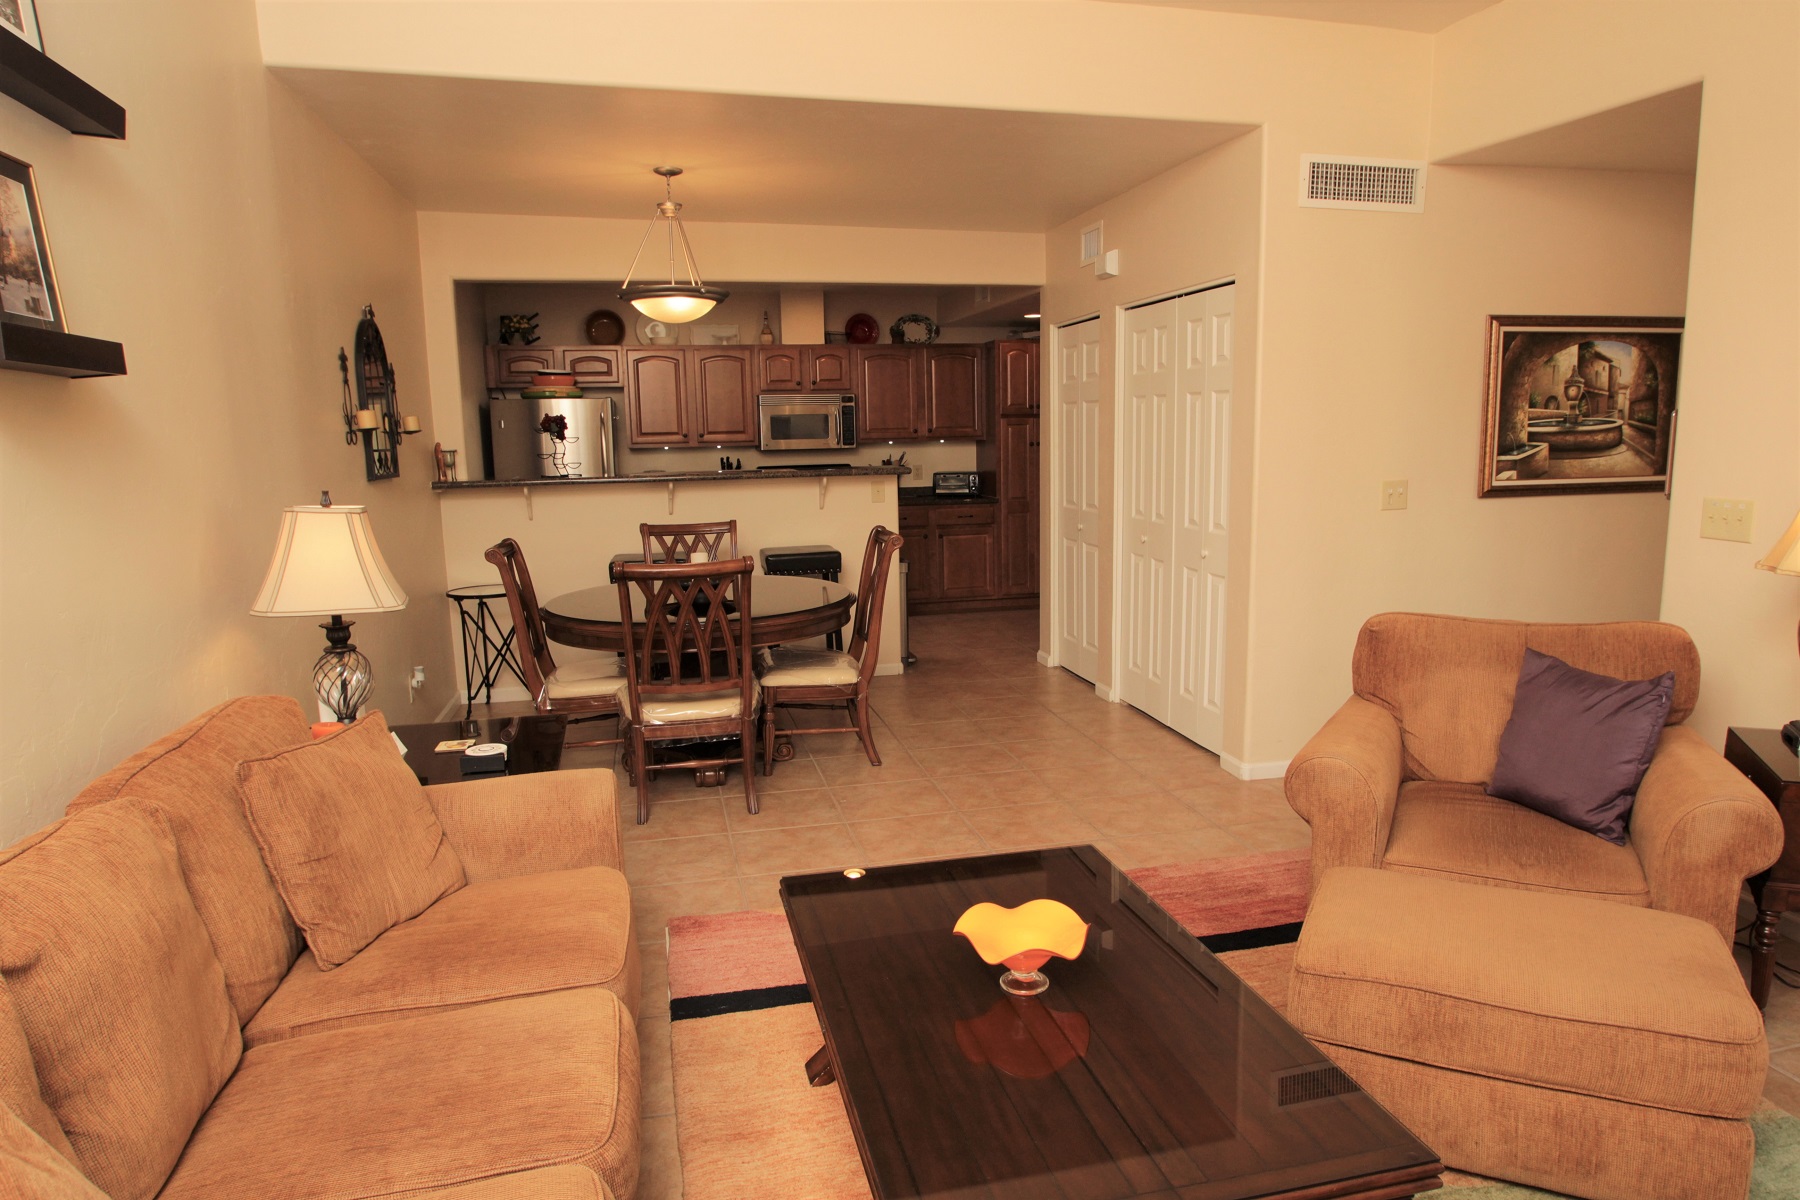 Floor Plan for Spacious Two Bedroom, Two Bath, Garden Level Condo With Enclosed Patio at The Reflections in the Catalinas 